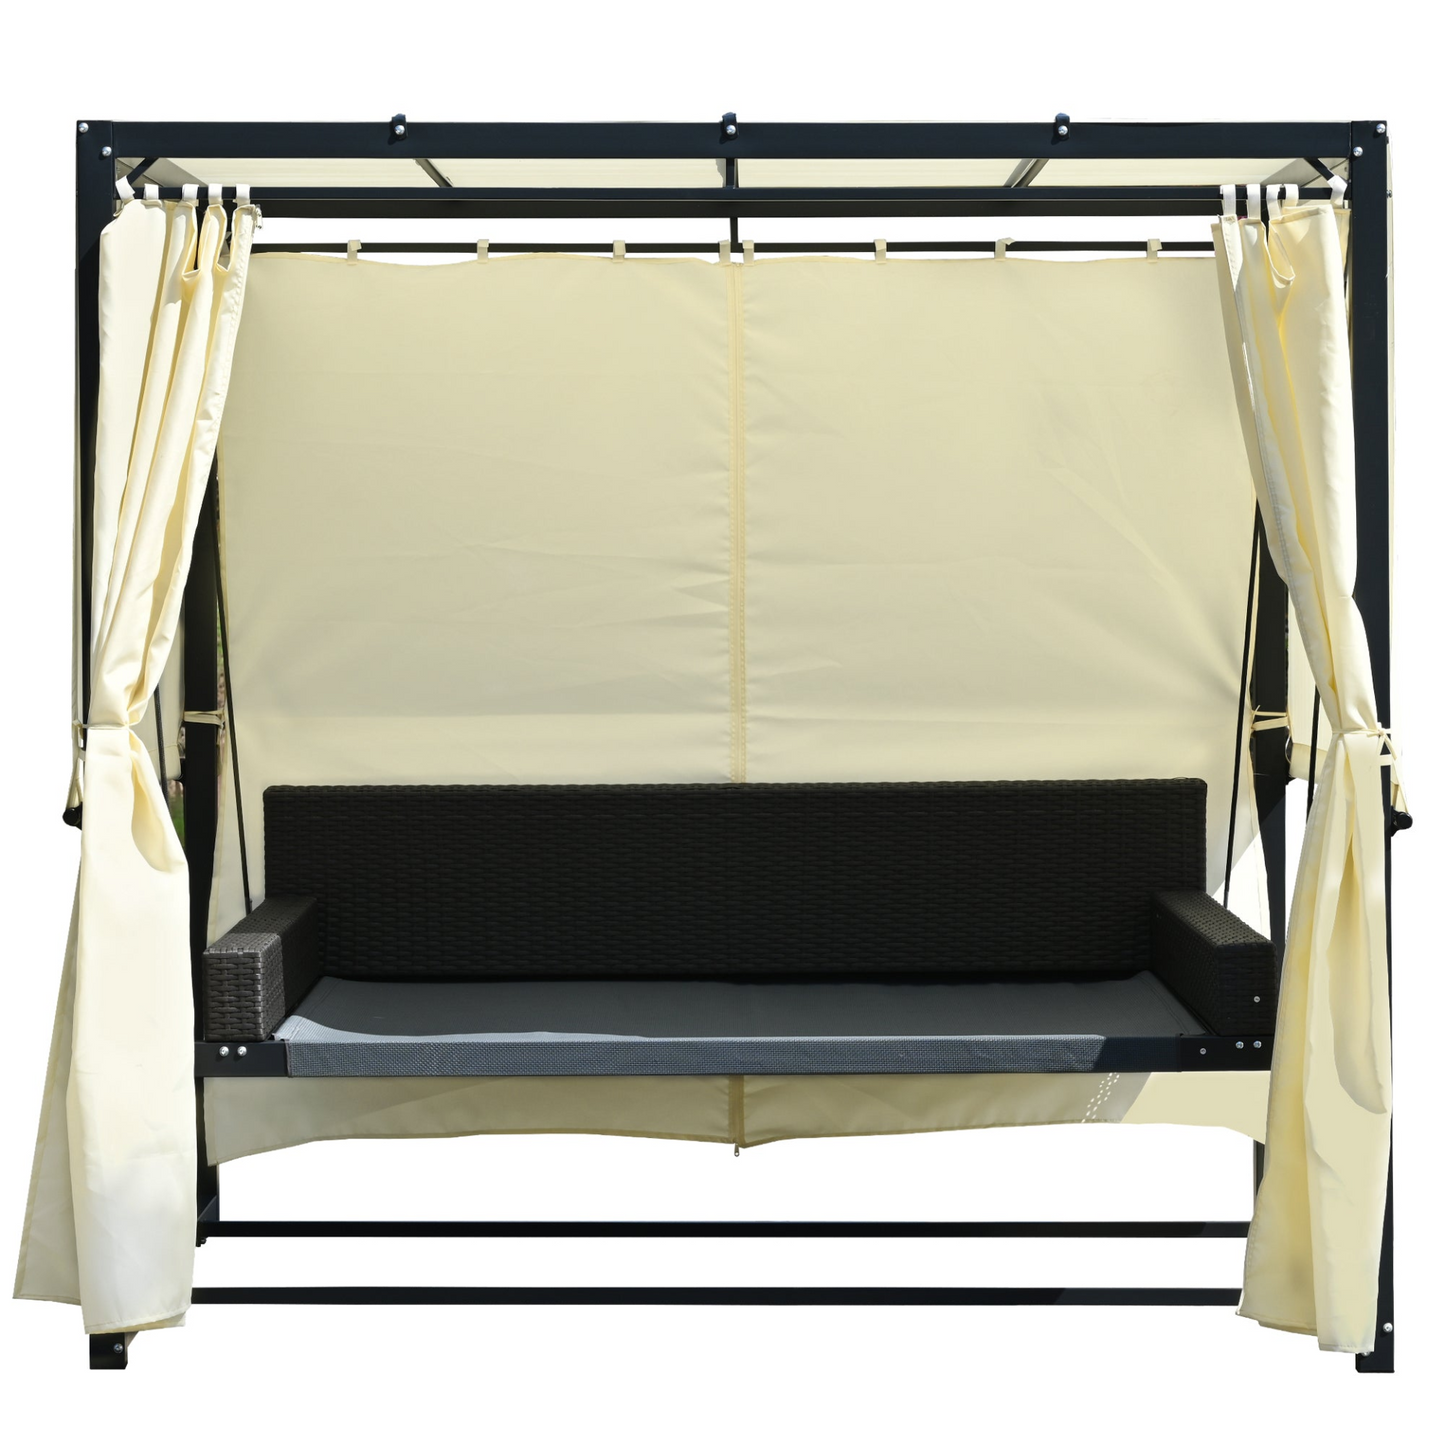 Style Outdoor Swing Bed for 2-3 People